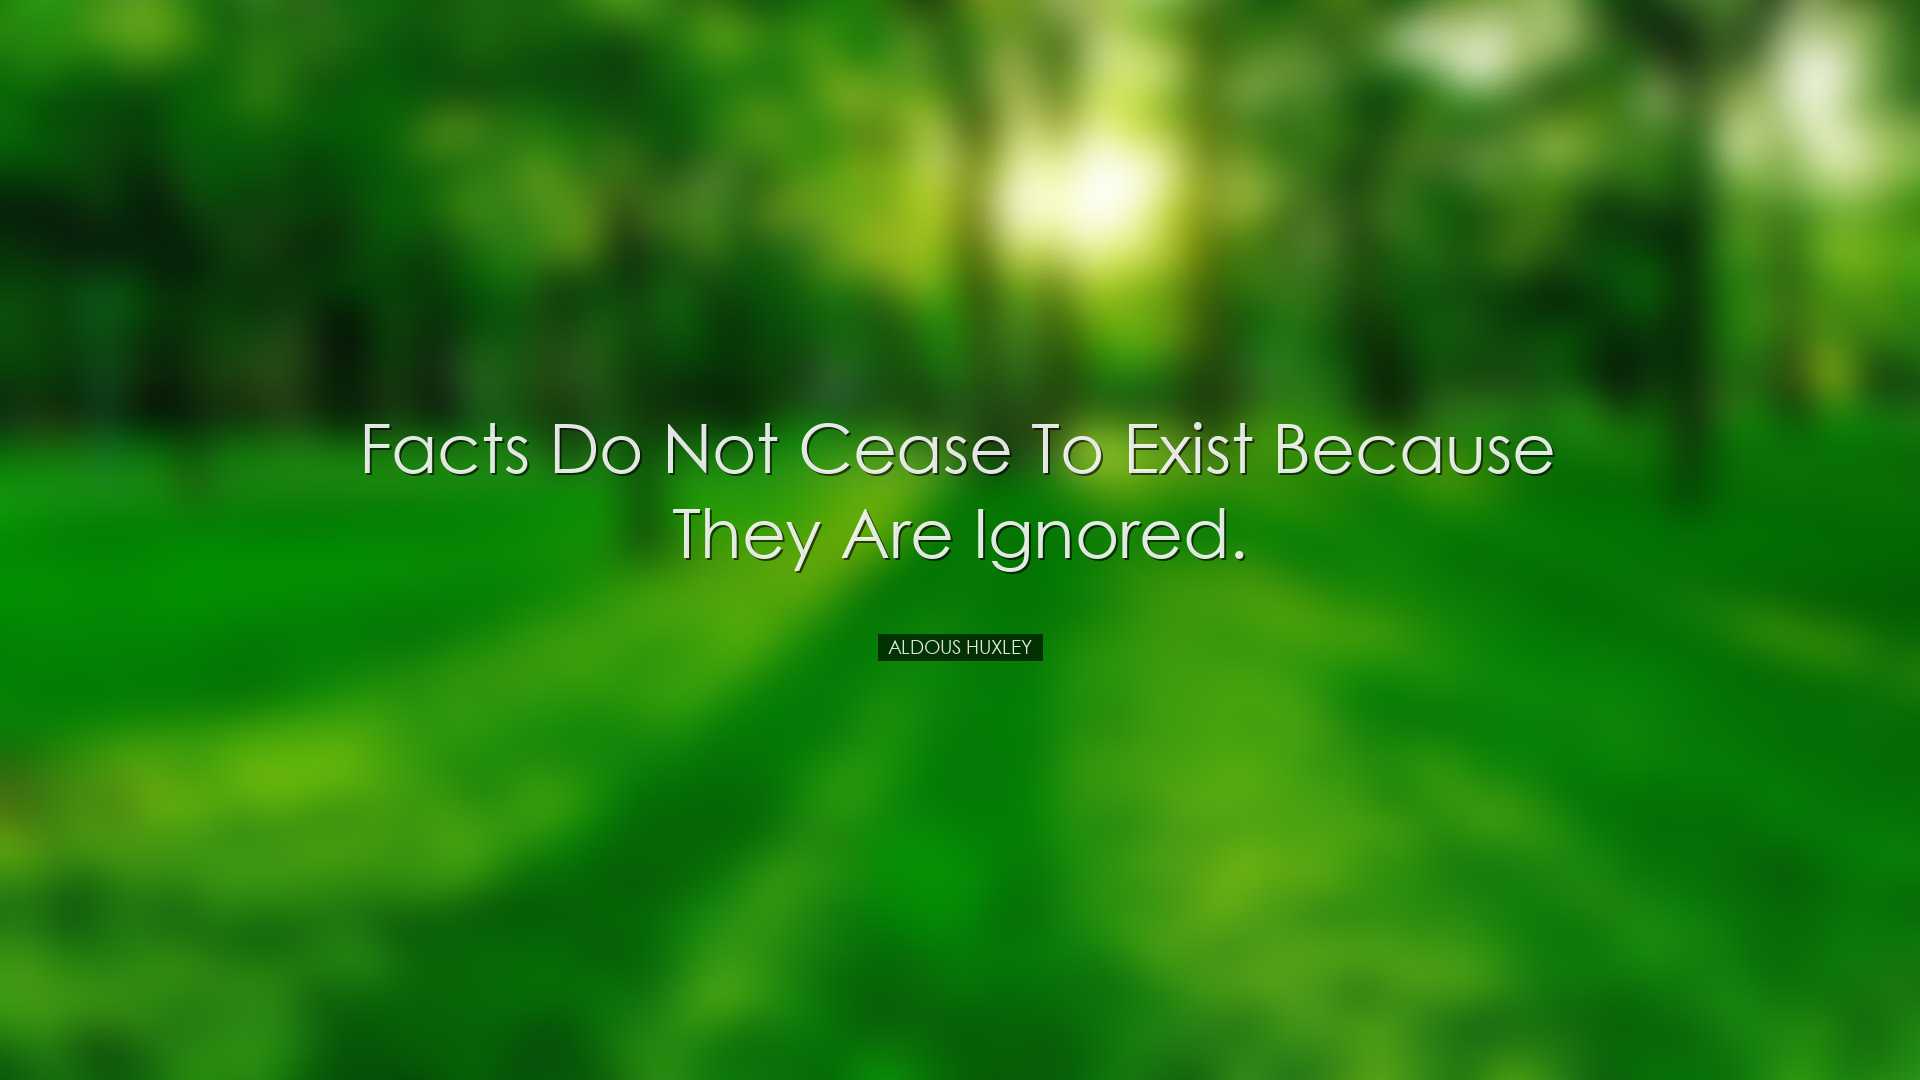 Facts do not cease to exist because they are ignored. - Aldous Hux